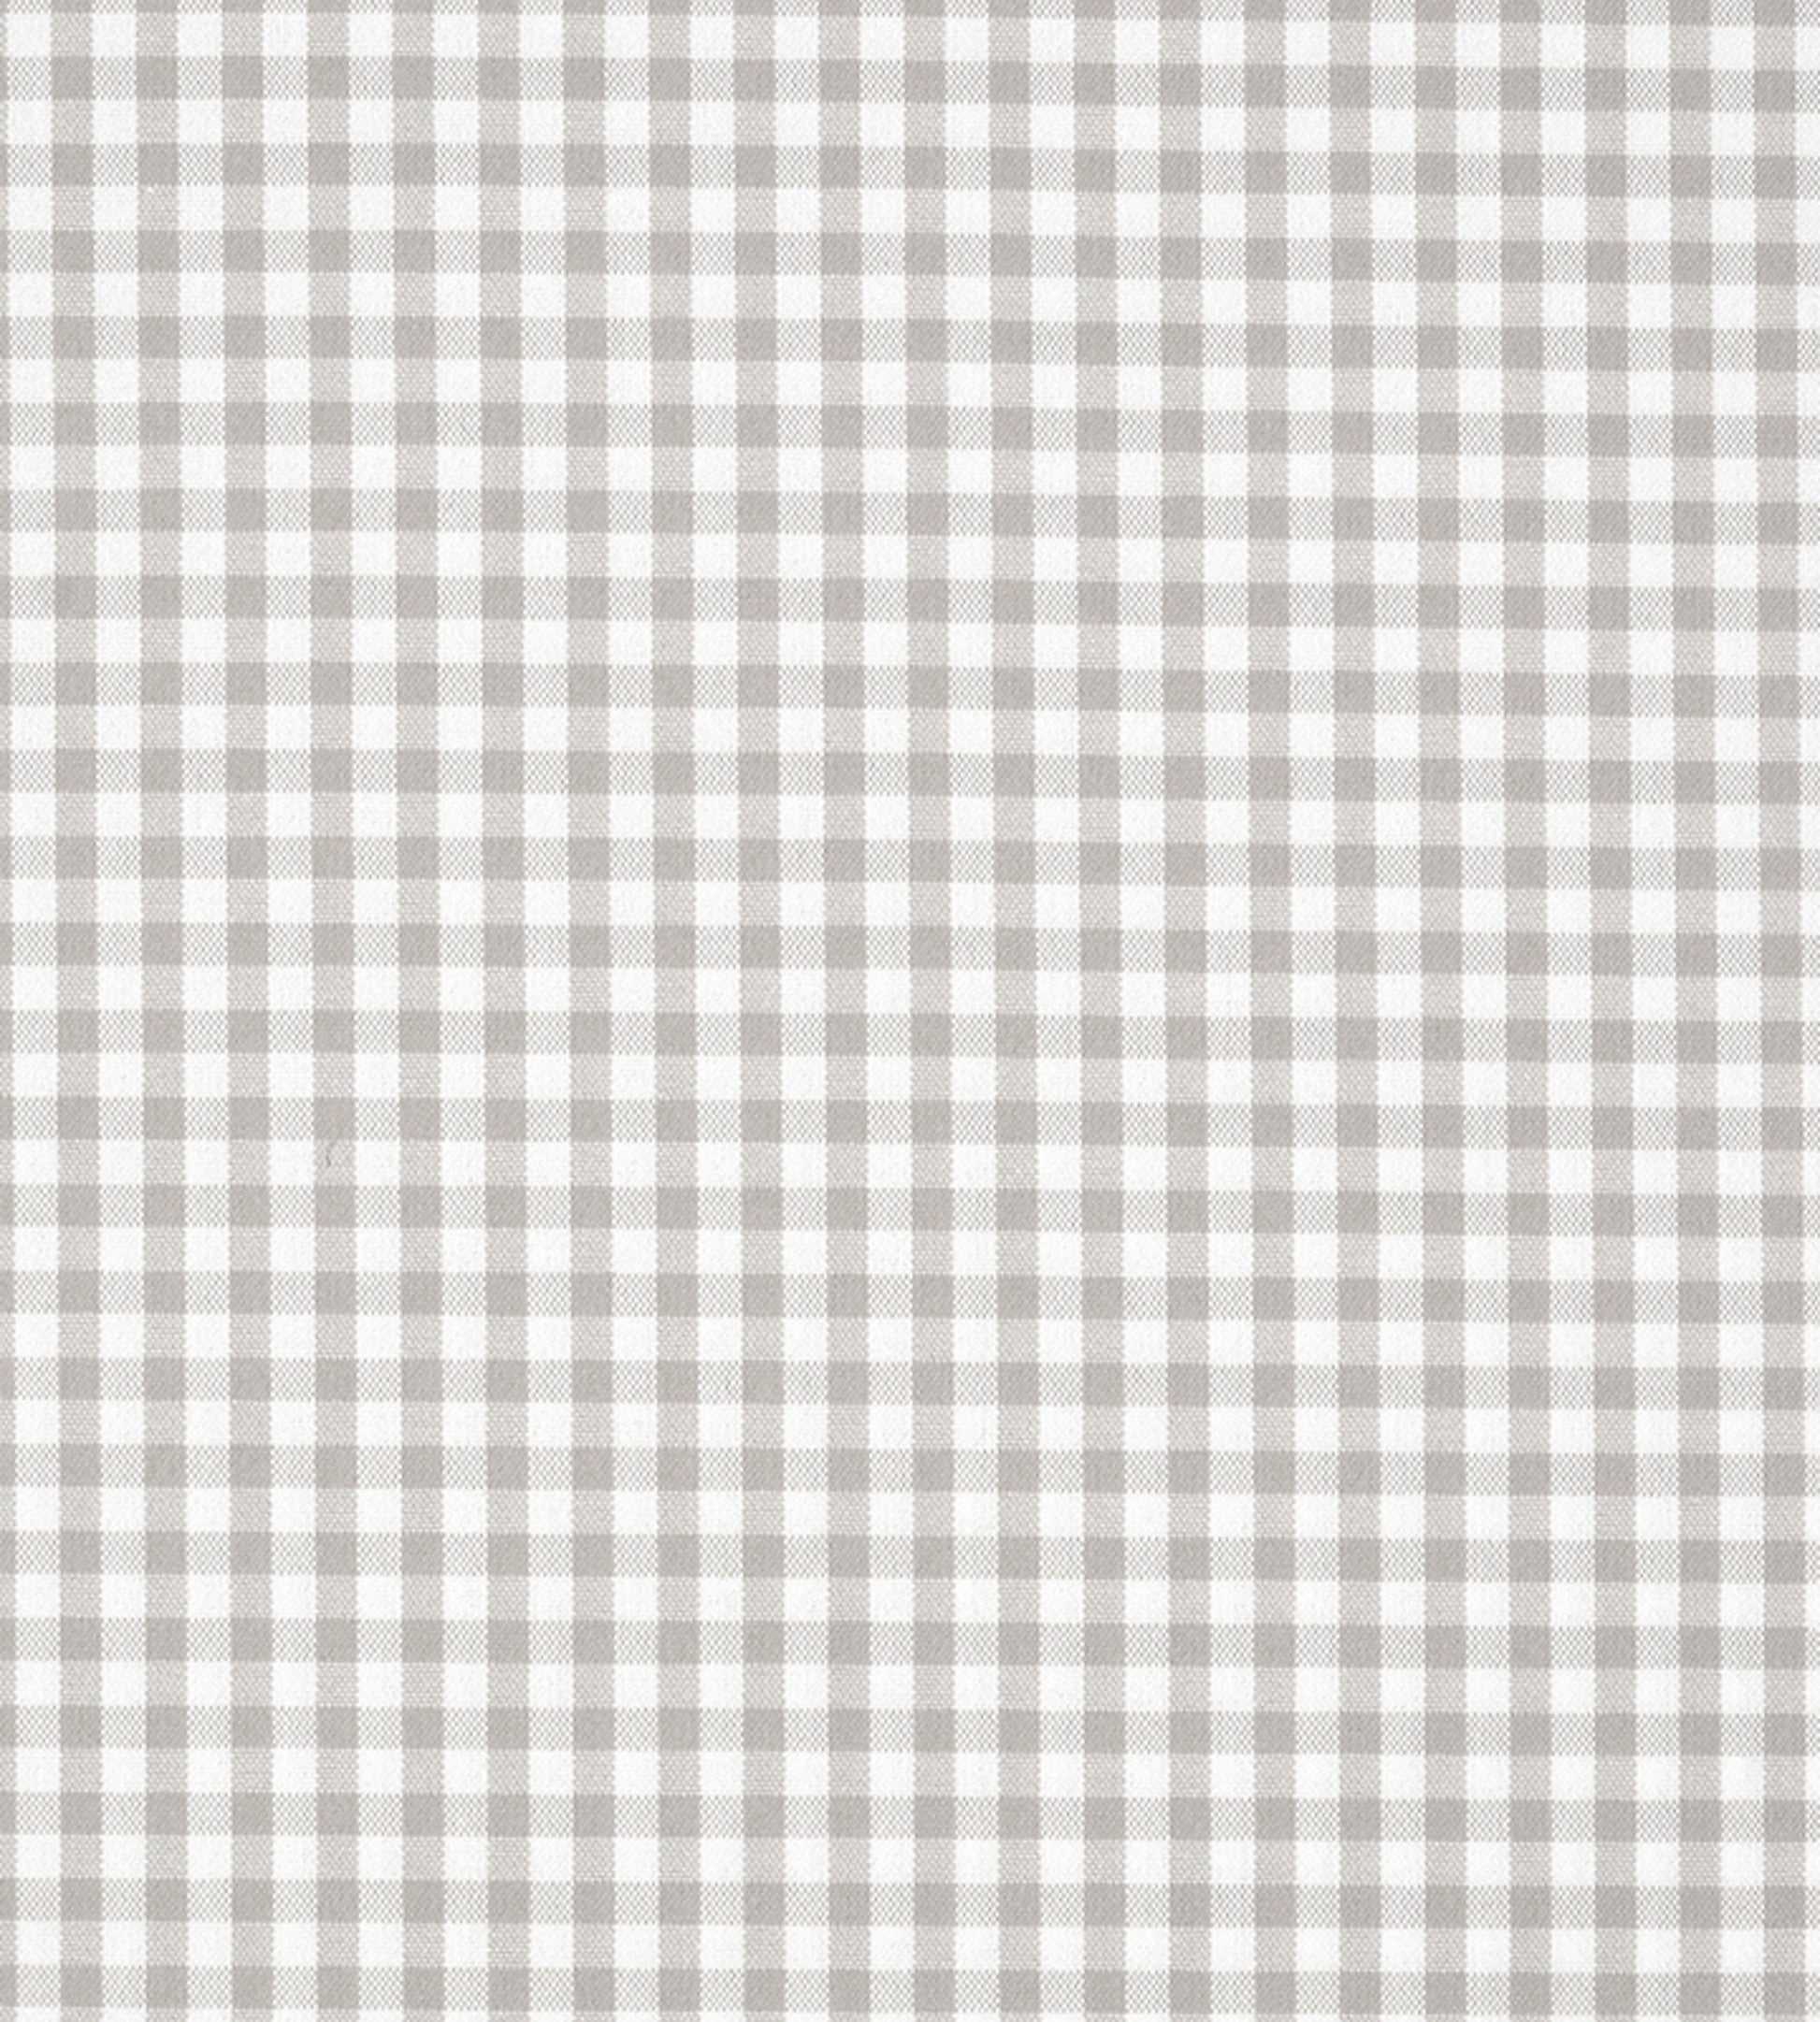 Purchase Old World Weavers Fabric Product# F3 00143018, Poker Check Light Grey 1